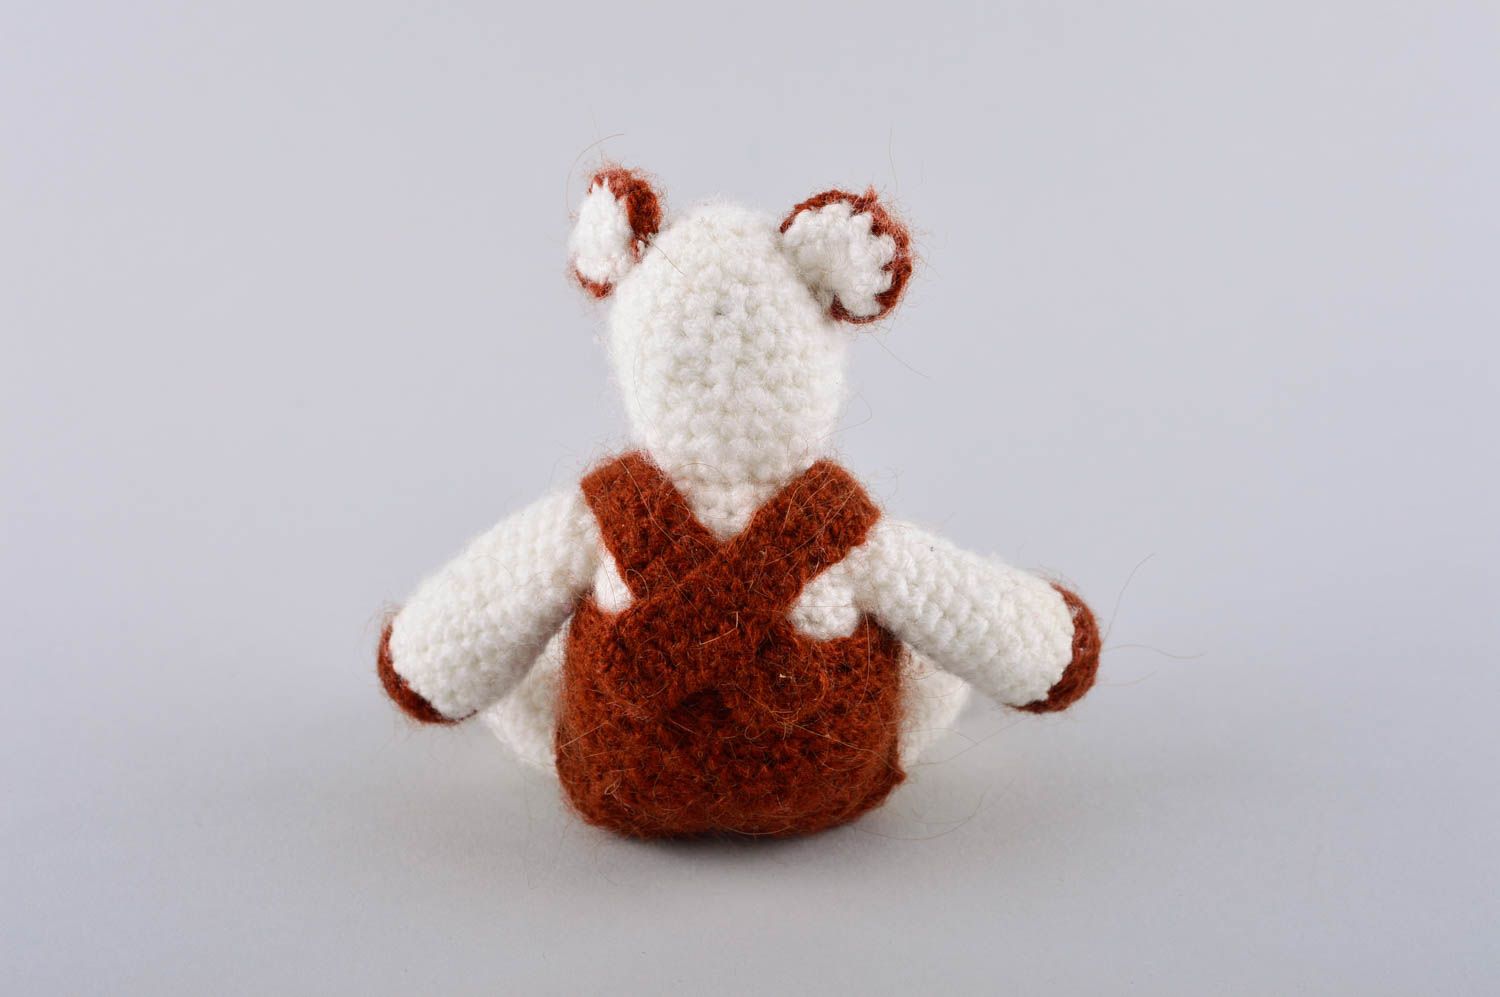 Crochet toy decorative stuffed toy handmade soft toy for children home decor photo 4